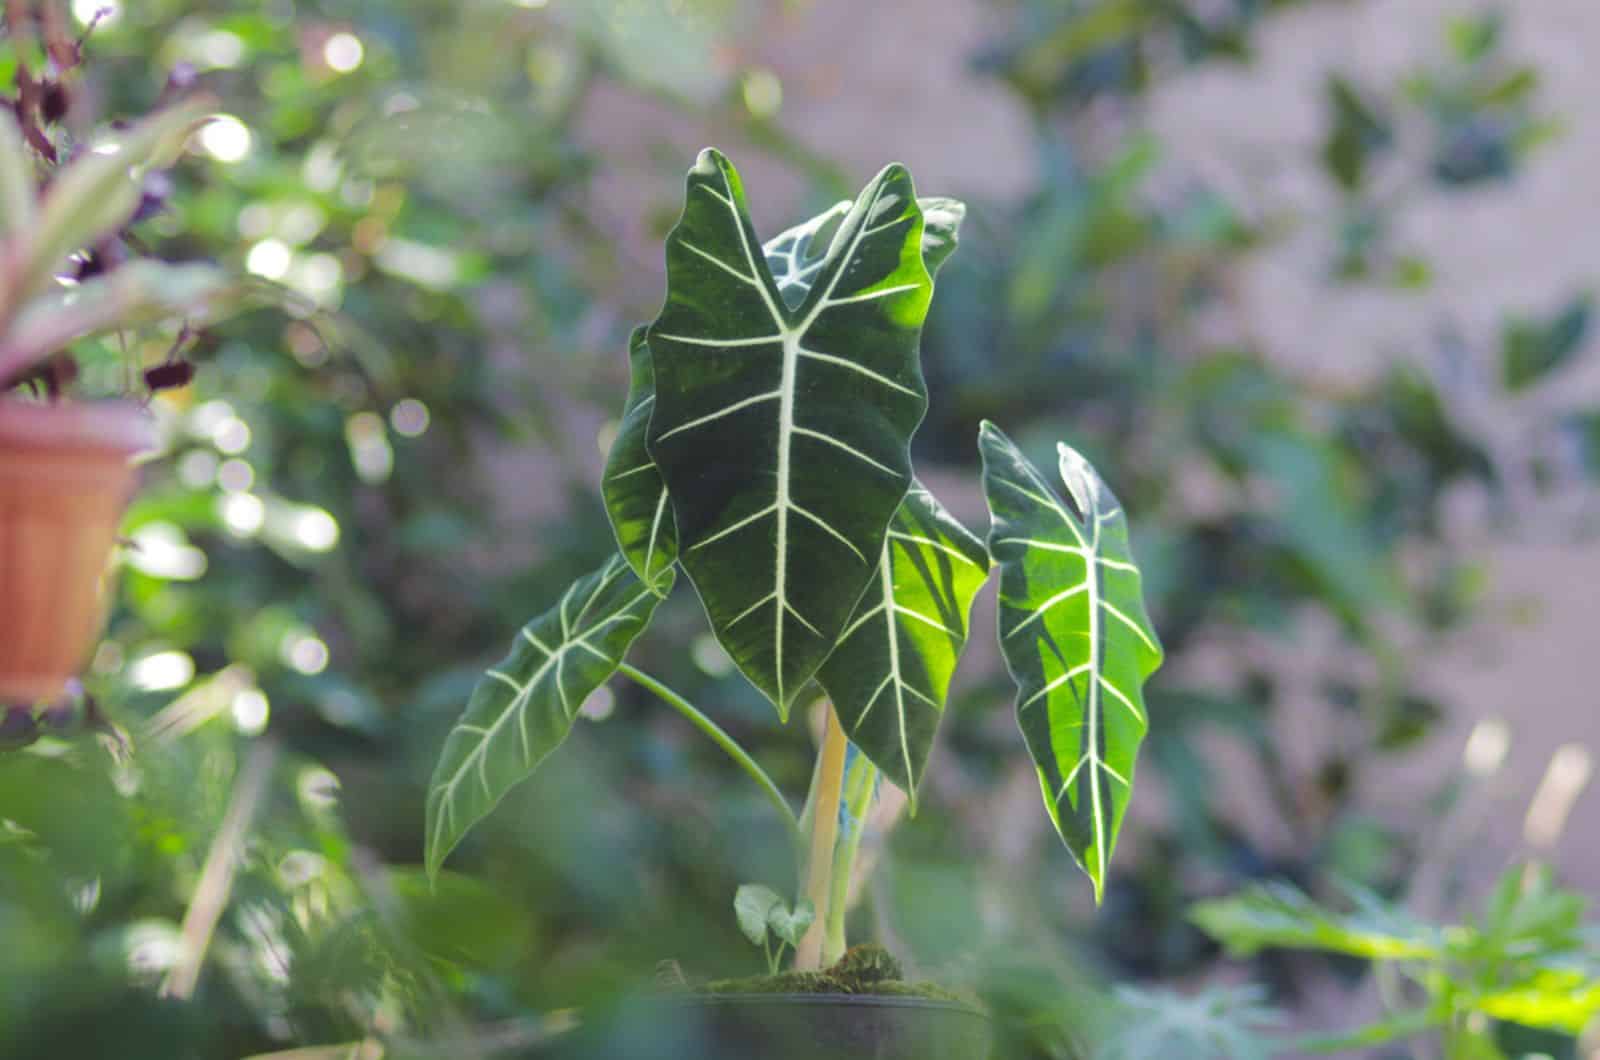 Alocasia Green Velvet with green leaves and white veins